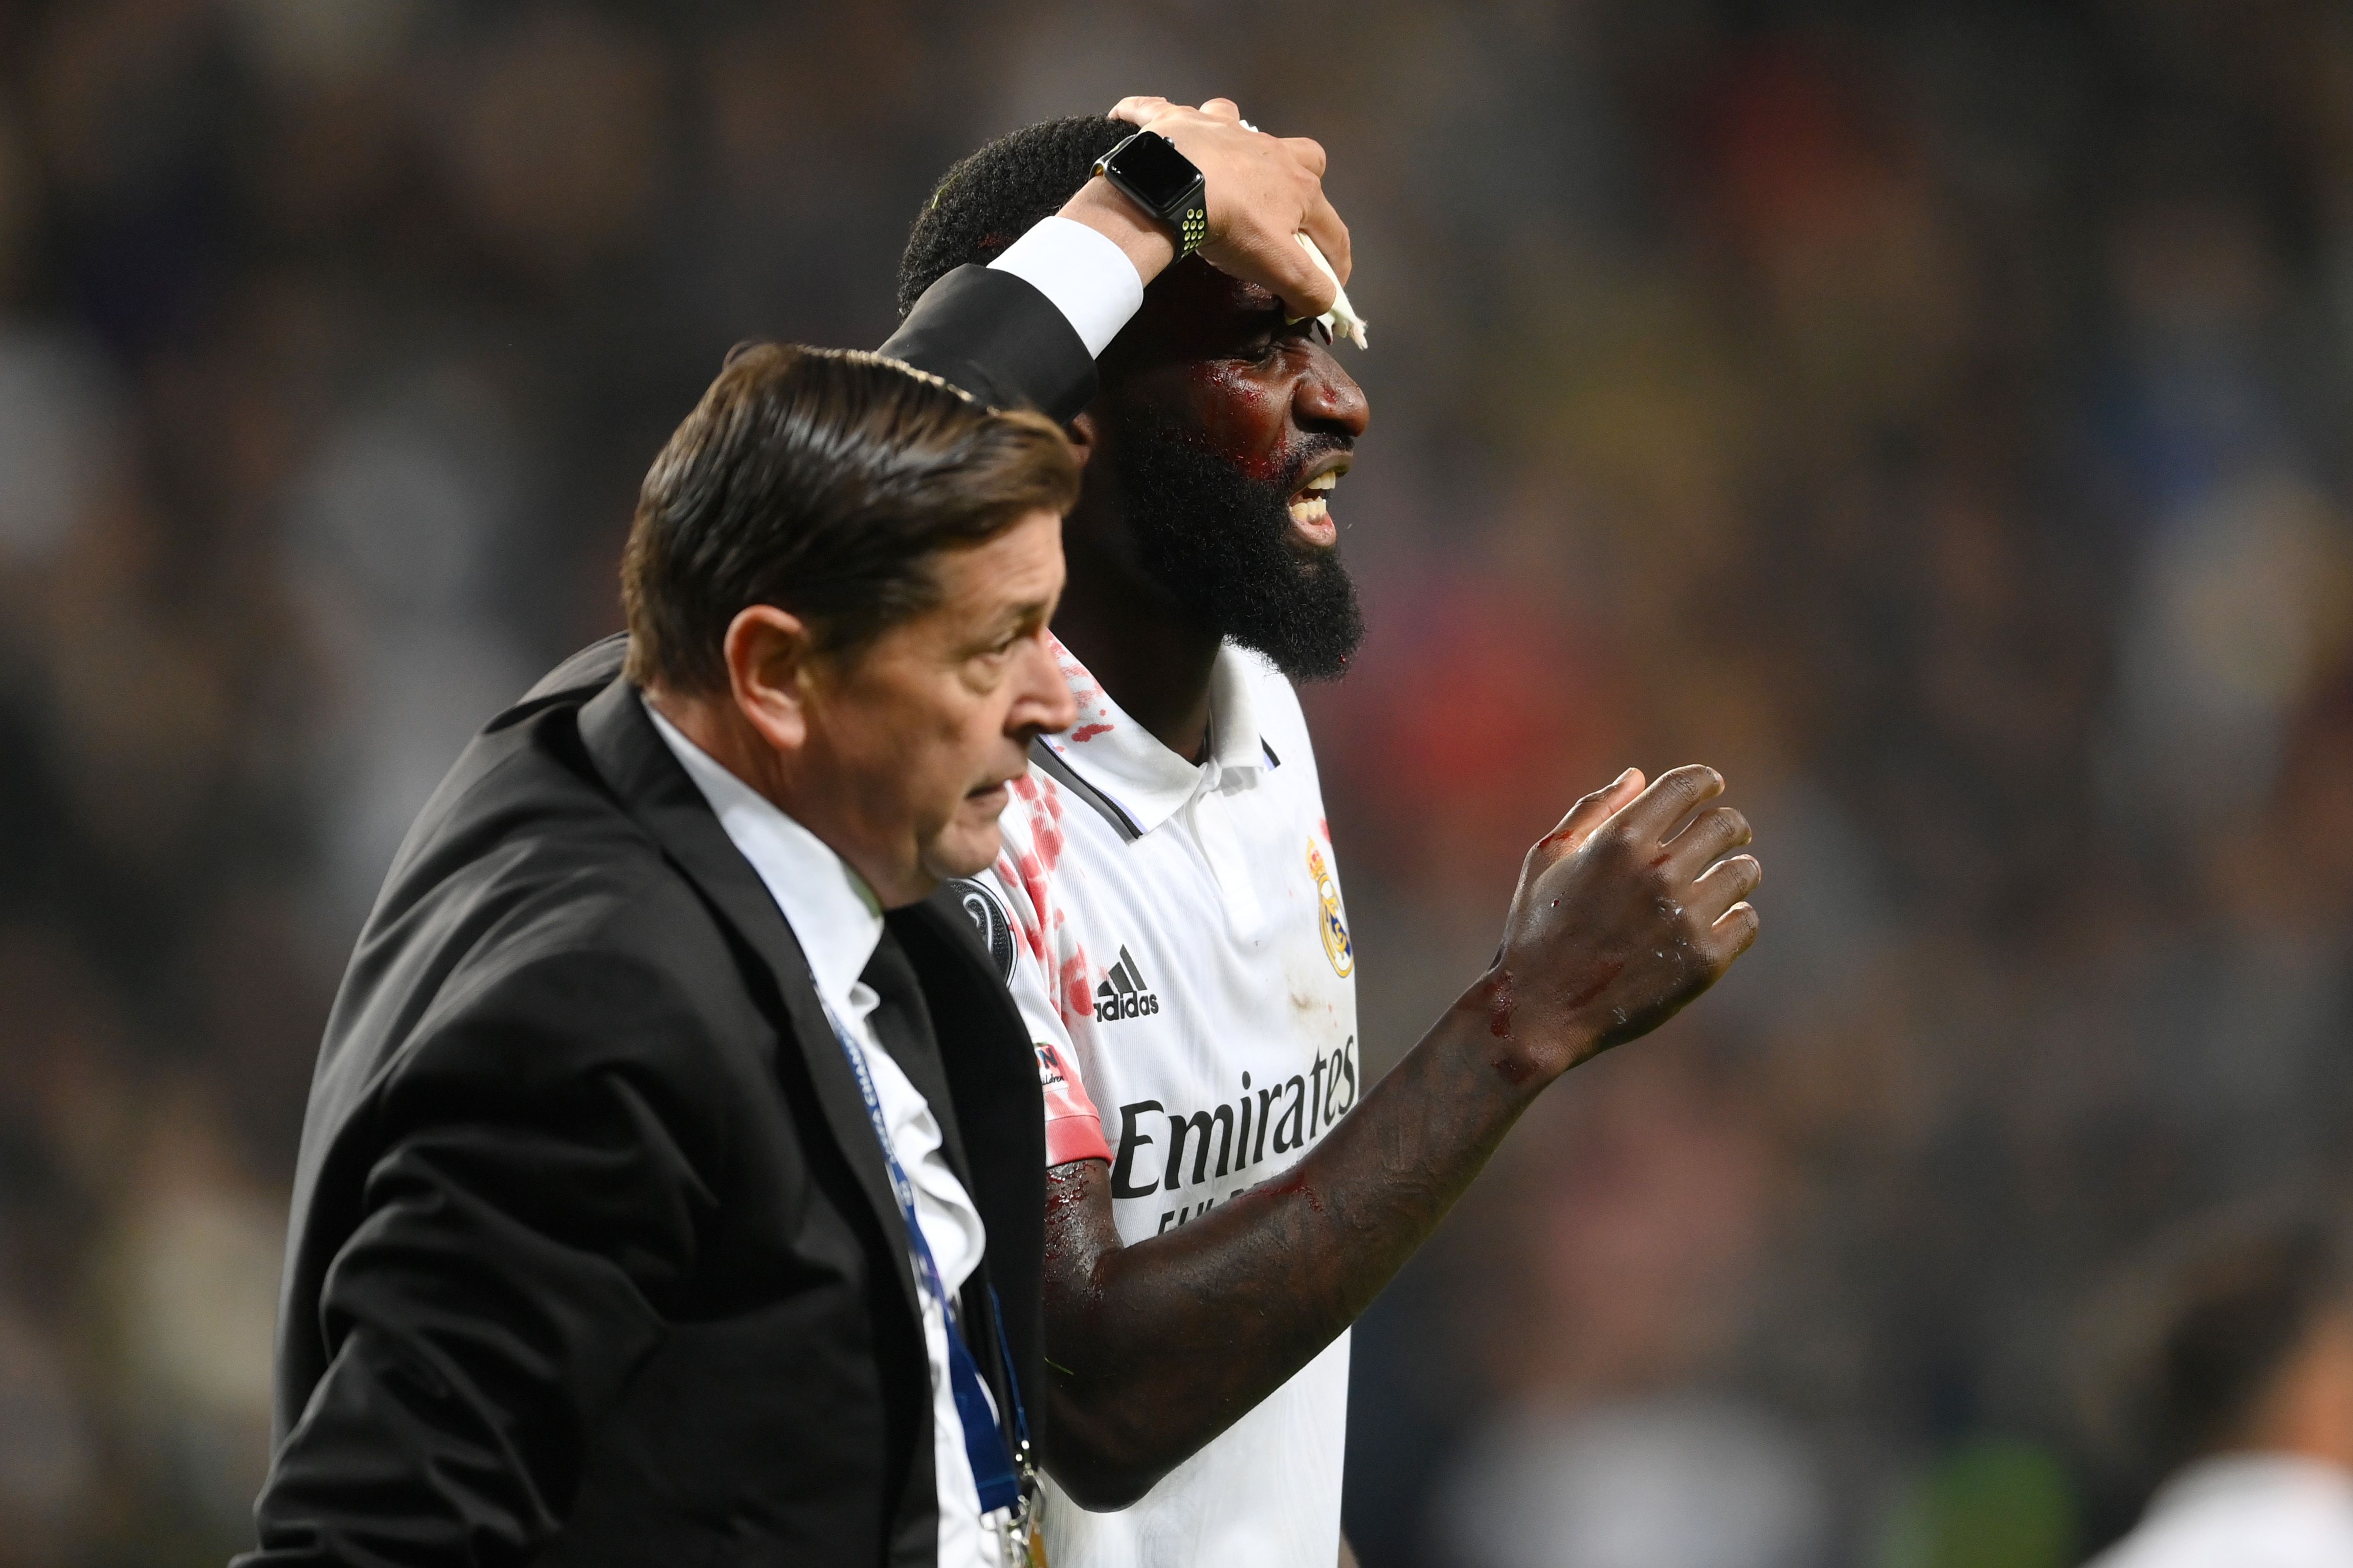 Why is Germany's Antonio Rudiger wearing a face mask at Euro 2020?